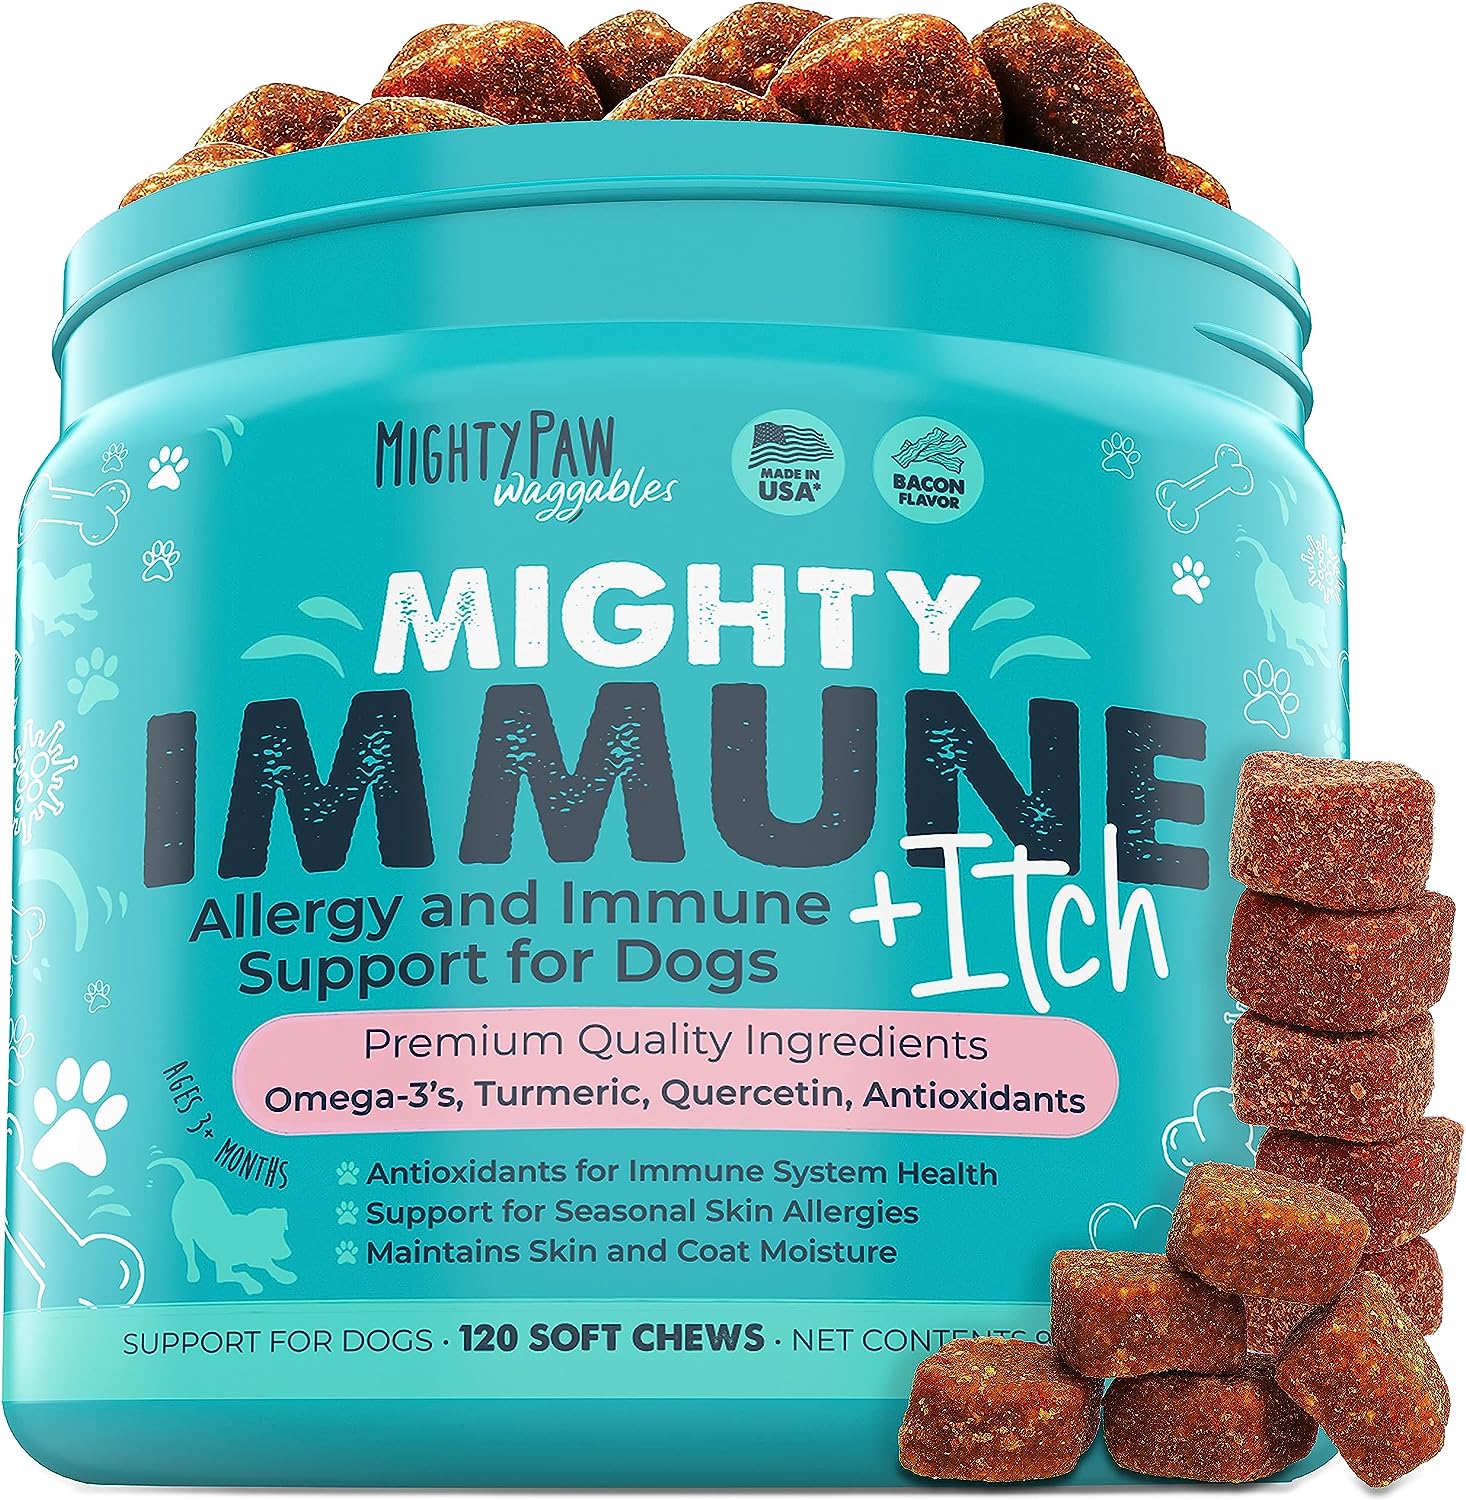 Vet-Formulated Dog Chews for Immune Support and Itch Relief